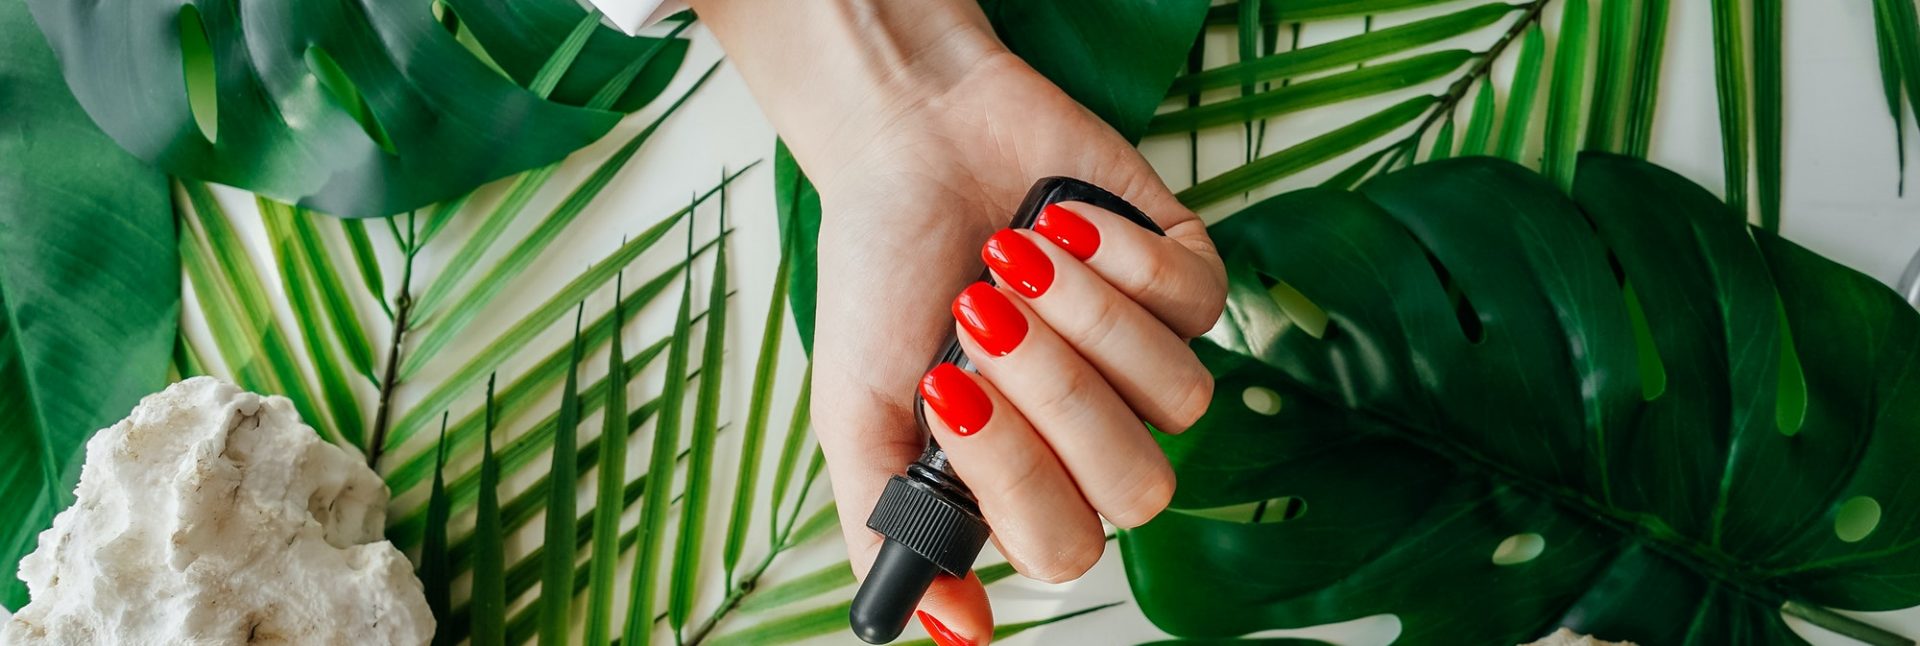 Manicured woman's nails with red nail polish.